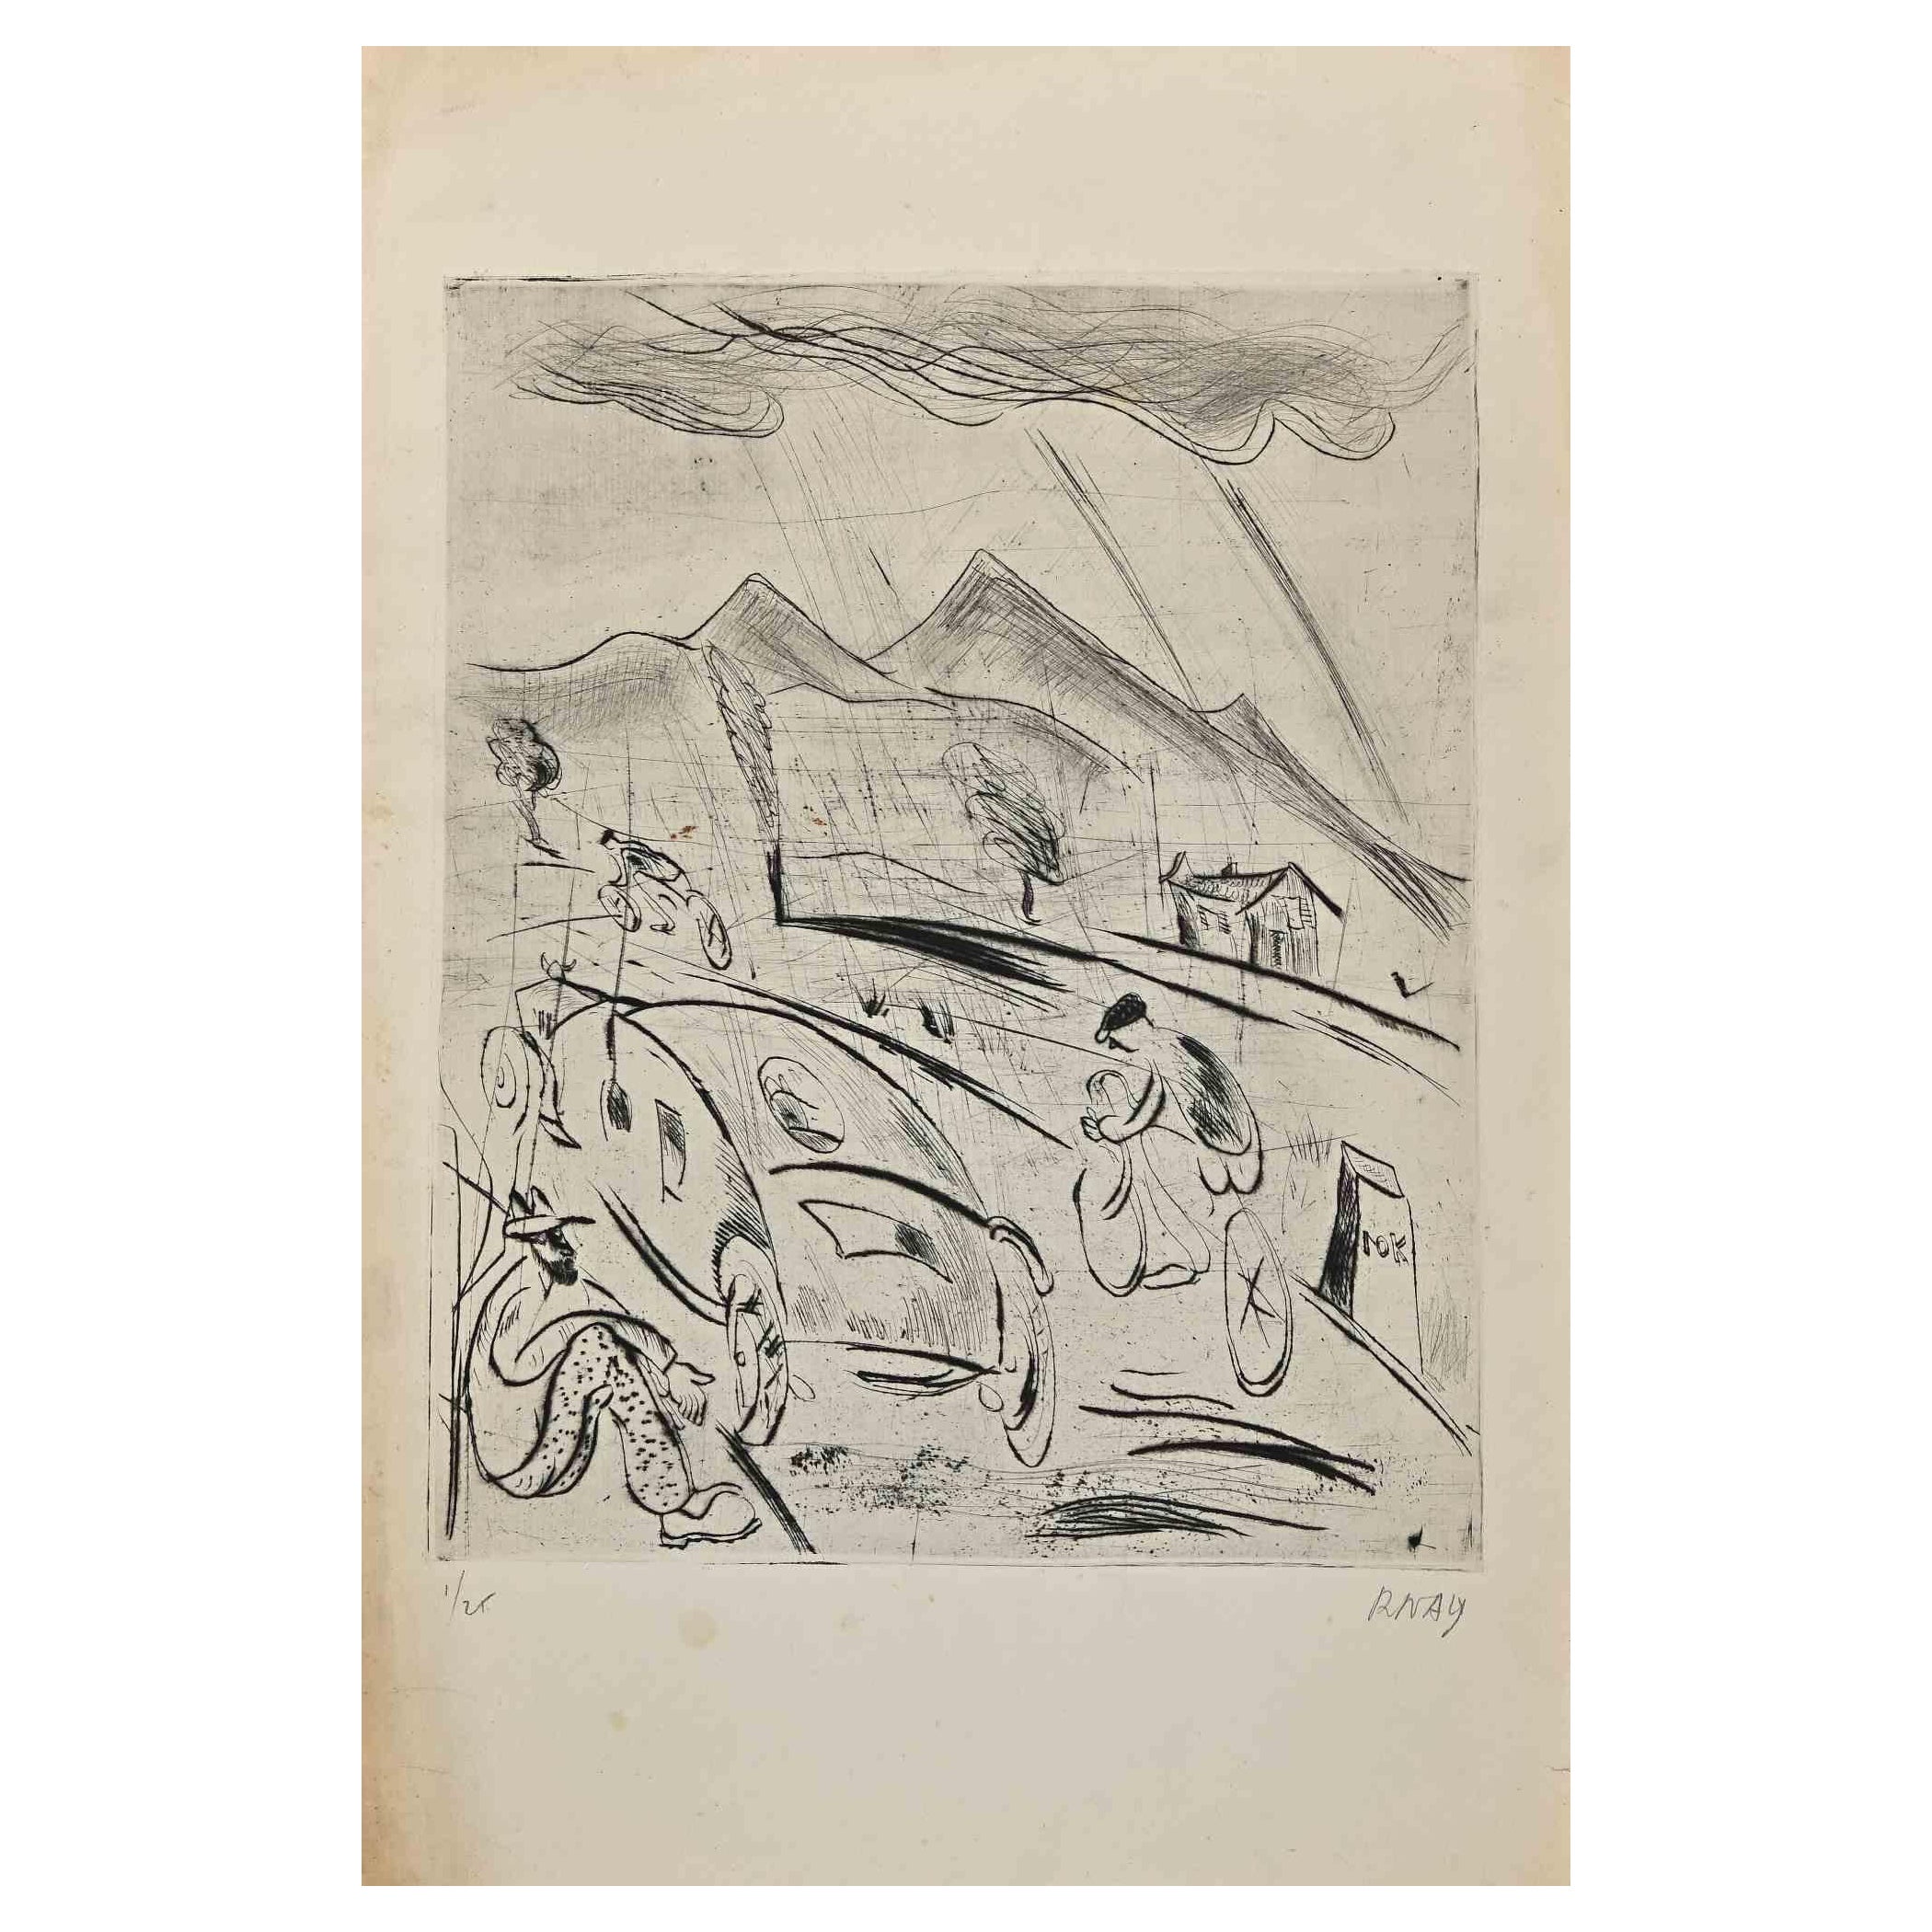 The Race is an Original Etching and Drypoint realized by Robert Naly (1900-1984).

Good condition on a yellowed paper .

Hand-signed by the artist on the lower right corner.